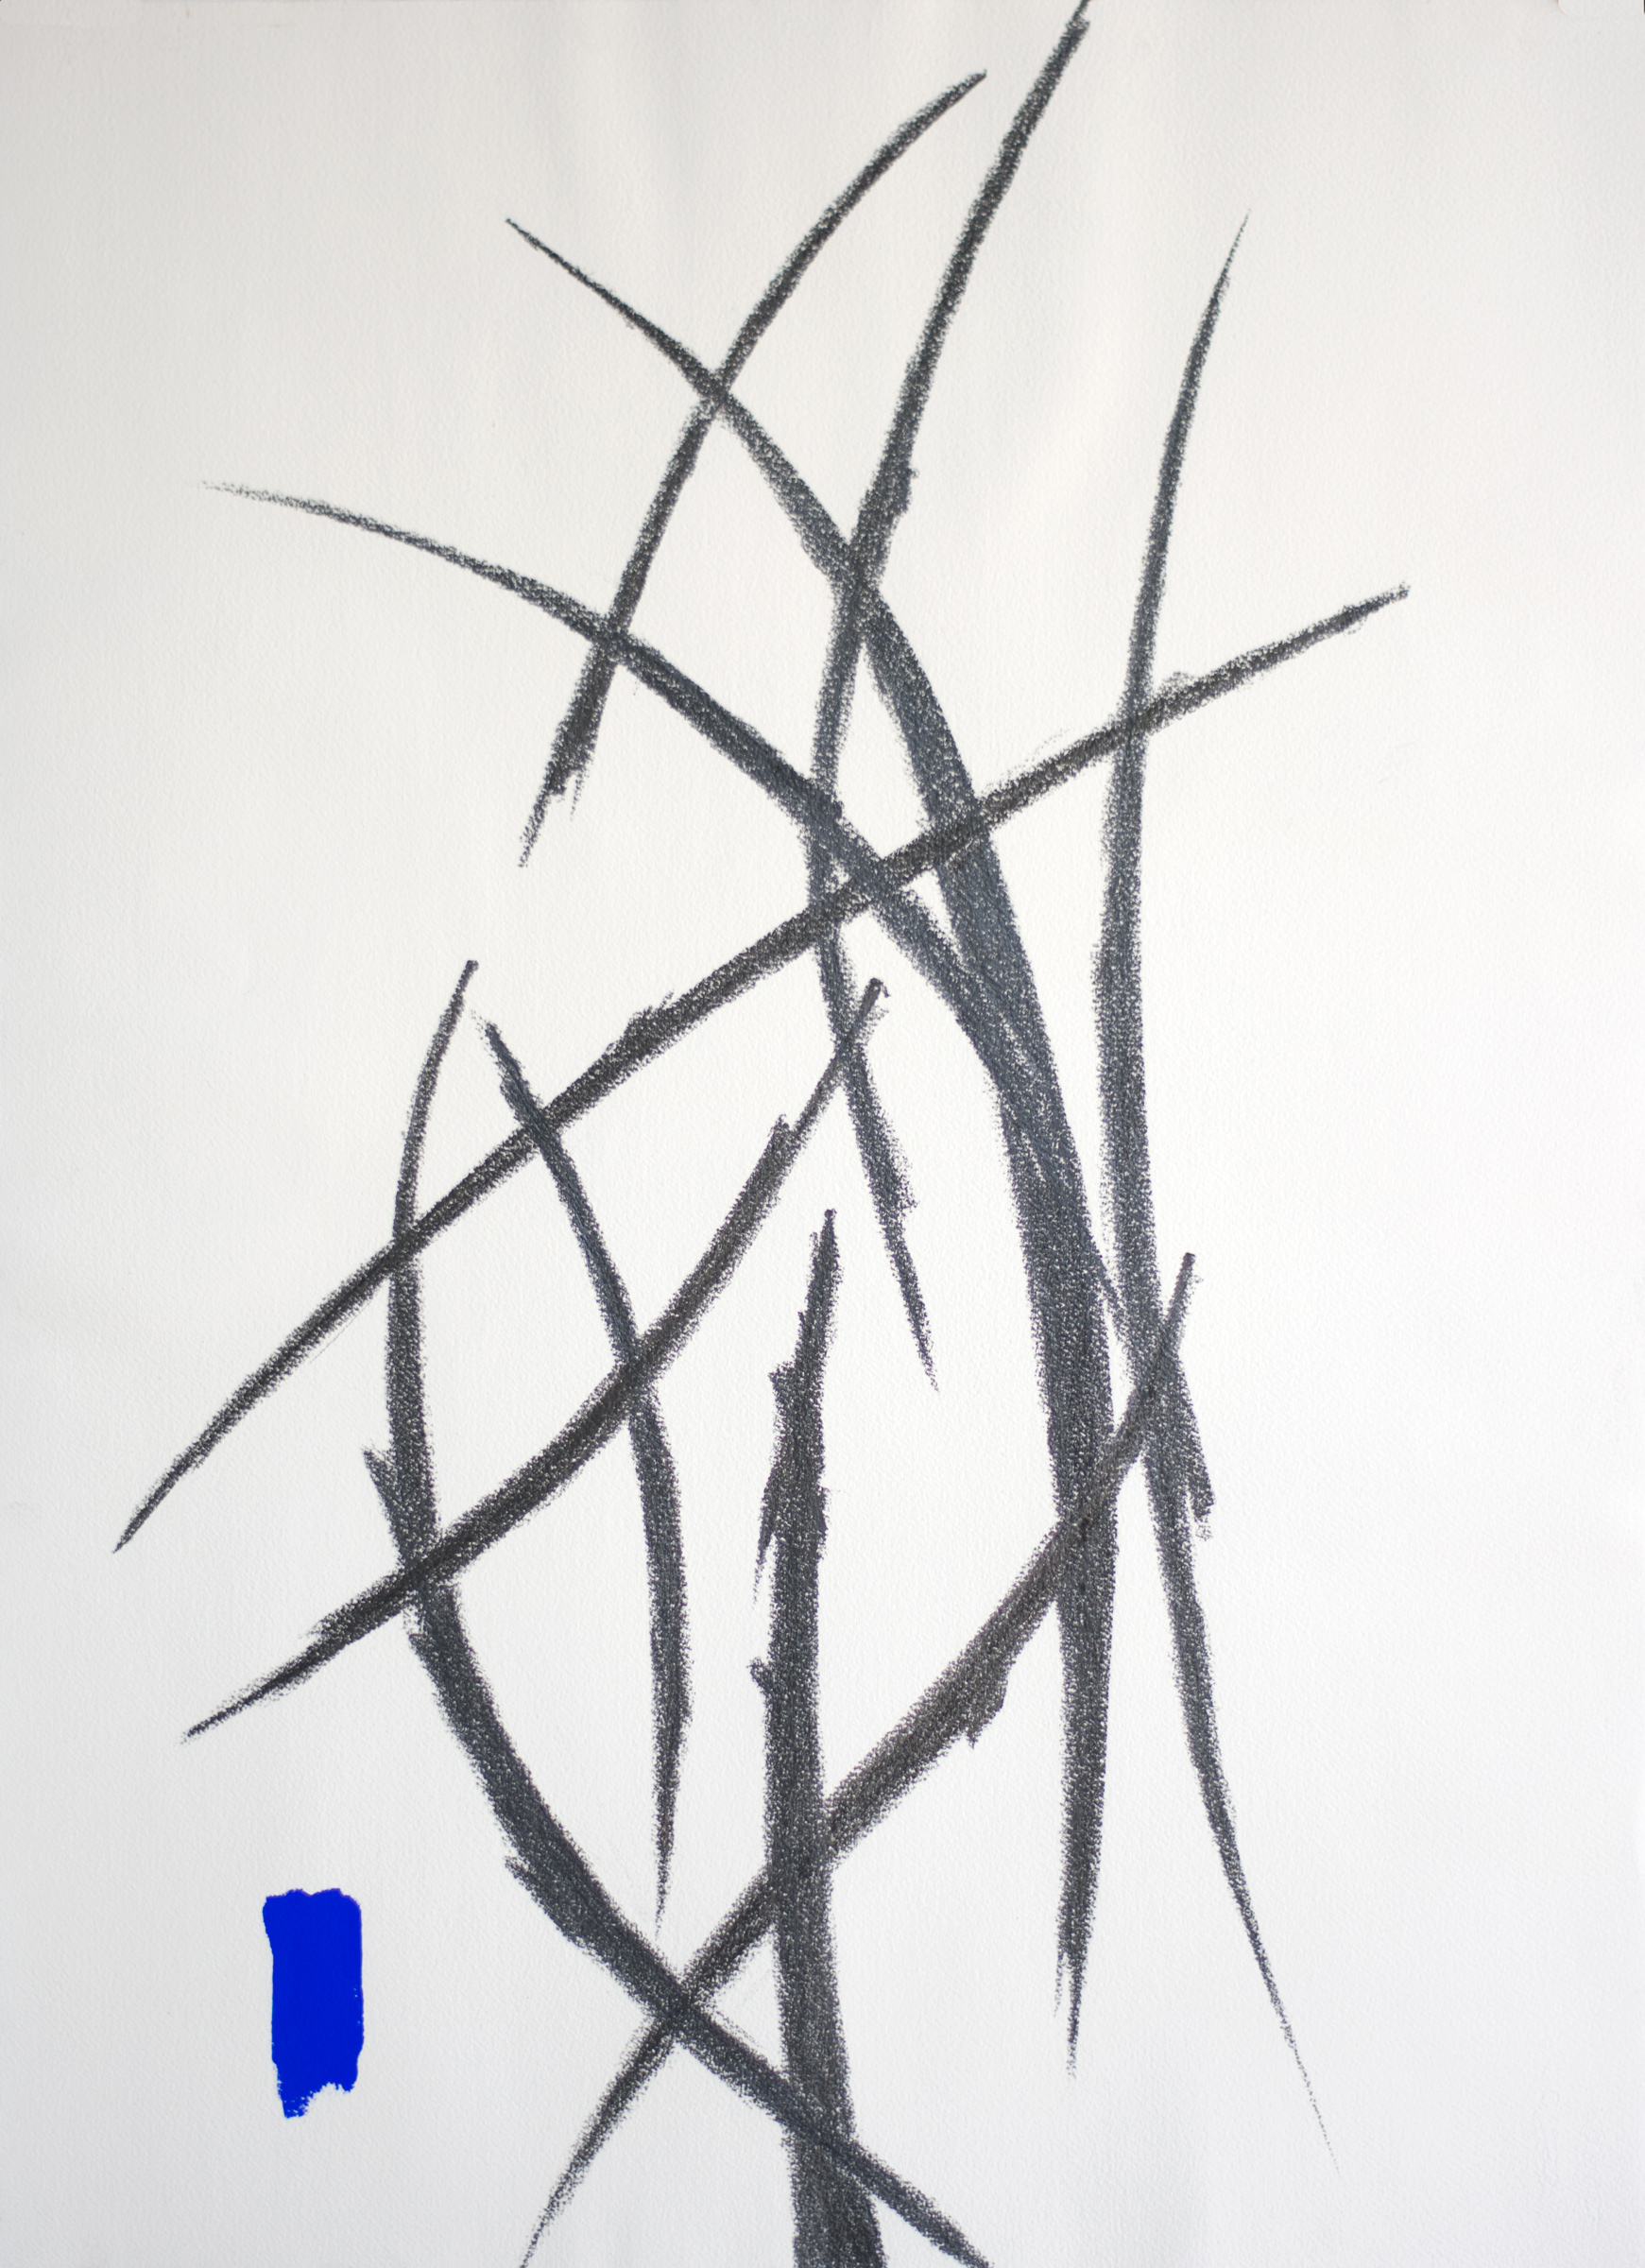 Study Blue No. 2, 2019, drawing by Adrian Mauriks.